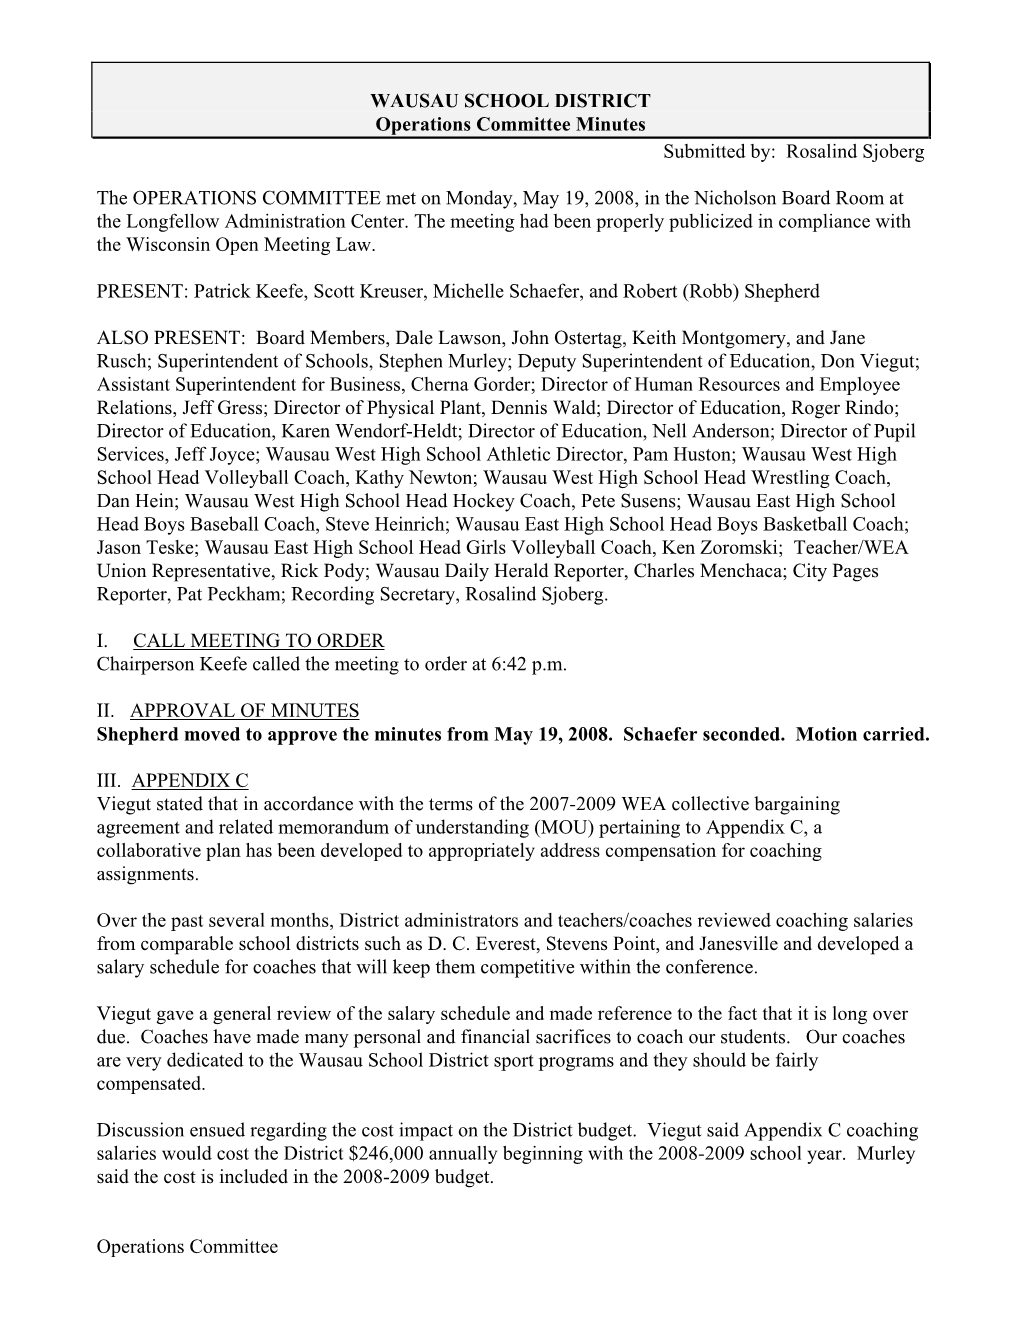 WAUSAU SCHOOL DISTRICT Operations Committee Minutes Submitted By: Rosalind Sjoberg